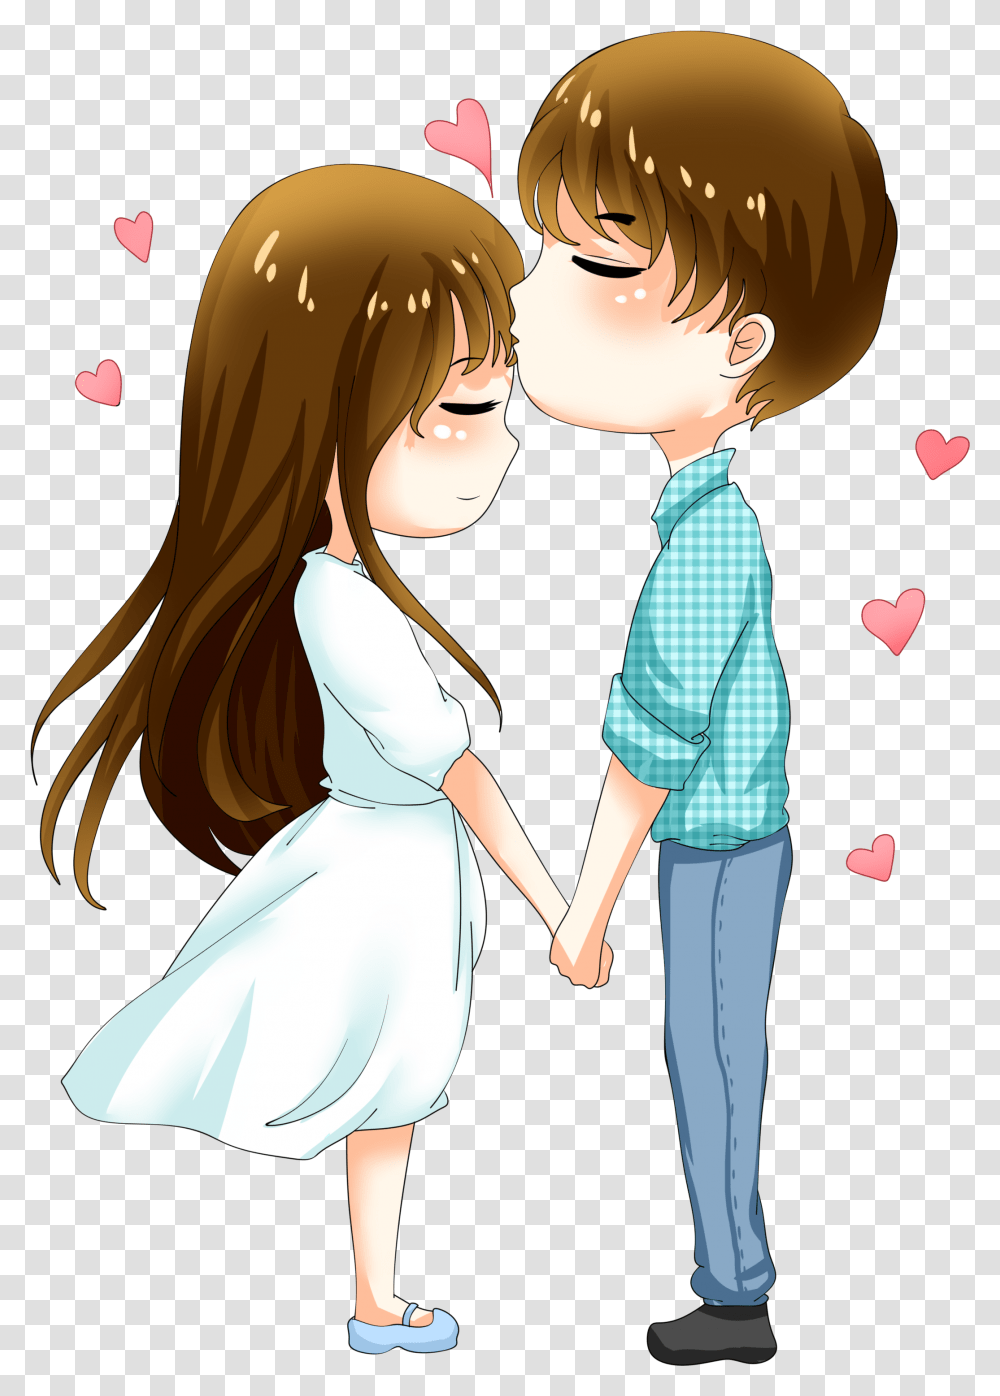 Cute Couple Couple Images Cartoon Hd, Person, Hand, Holding Hands, Dating Transparent Png